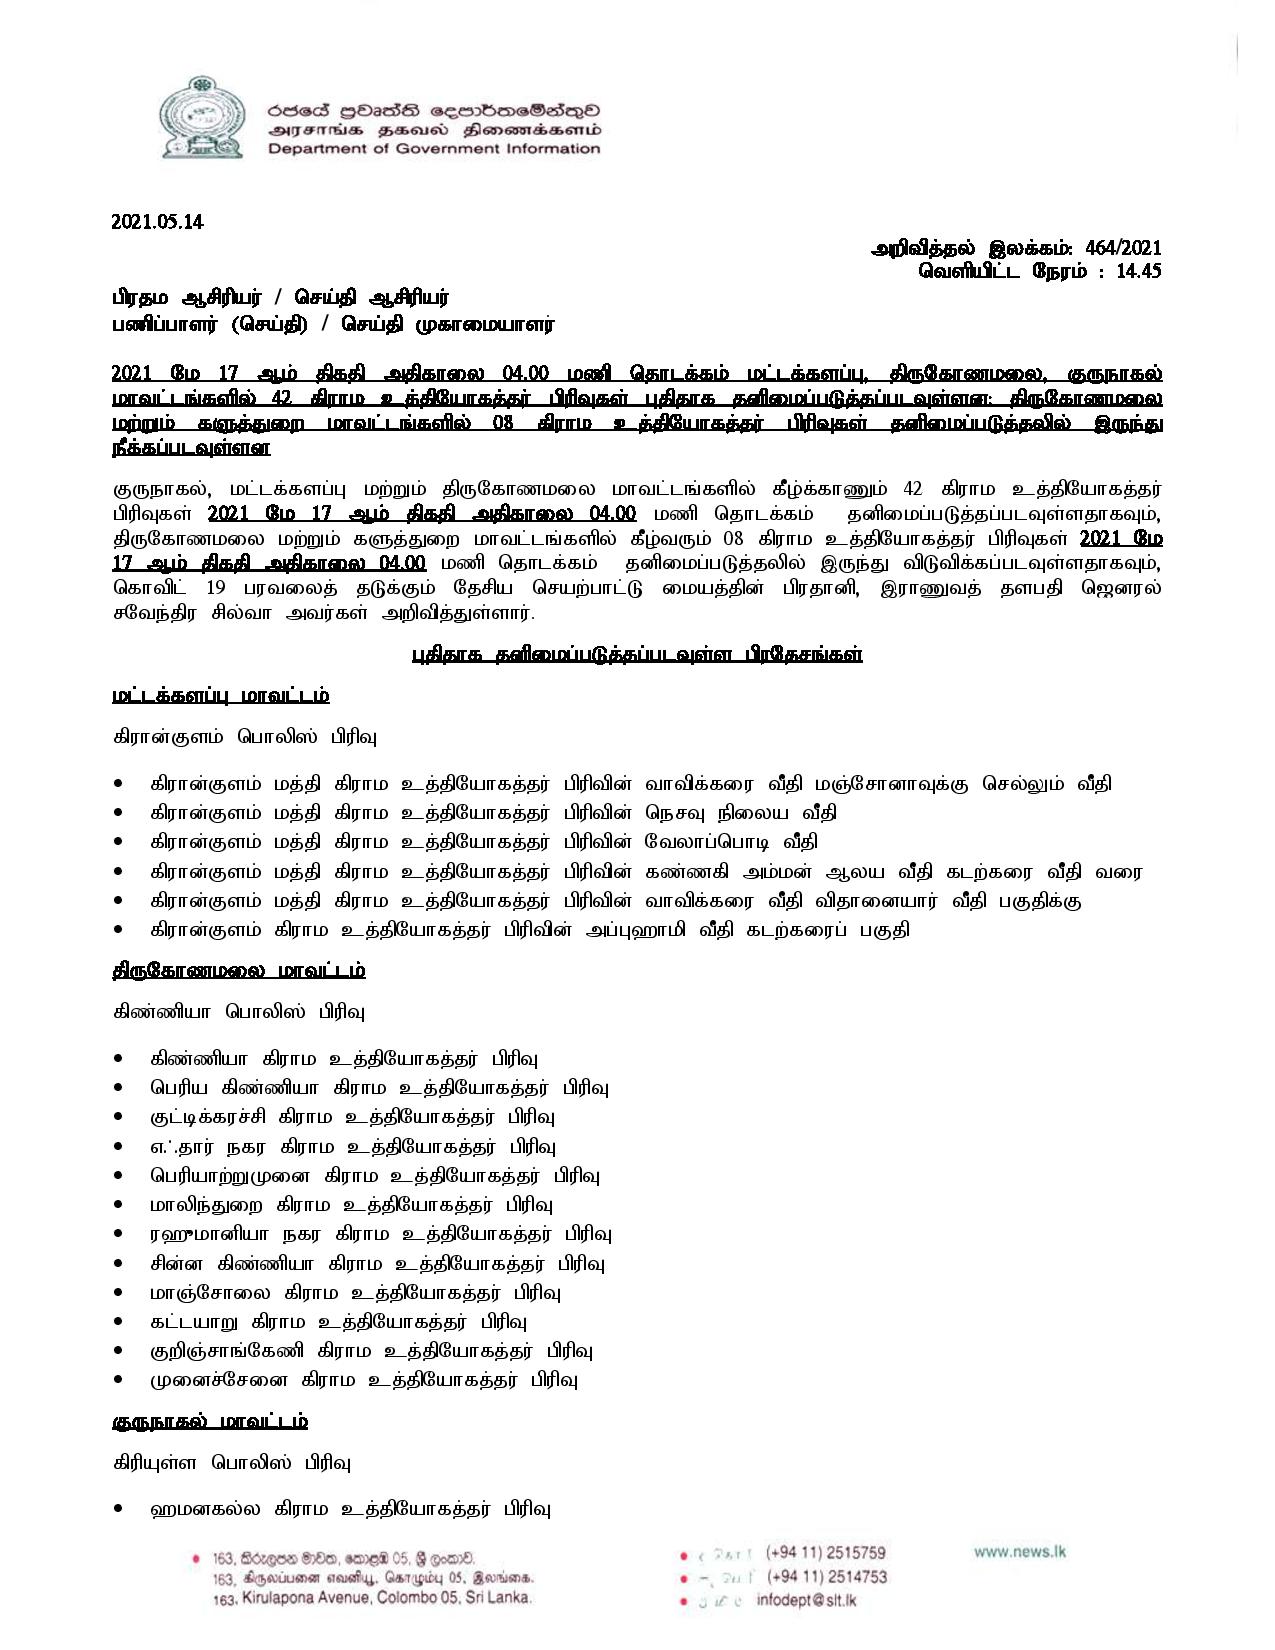 Release No 464 Tamil page 001